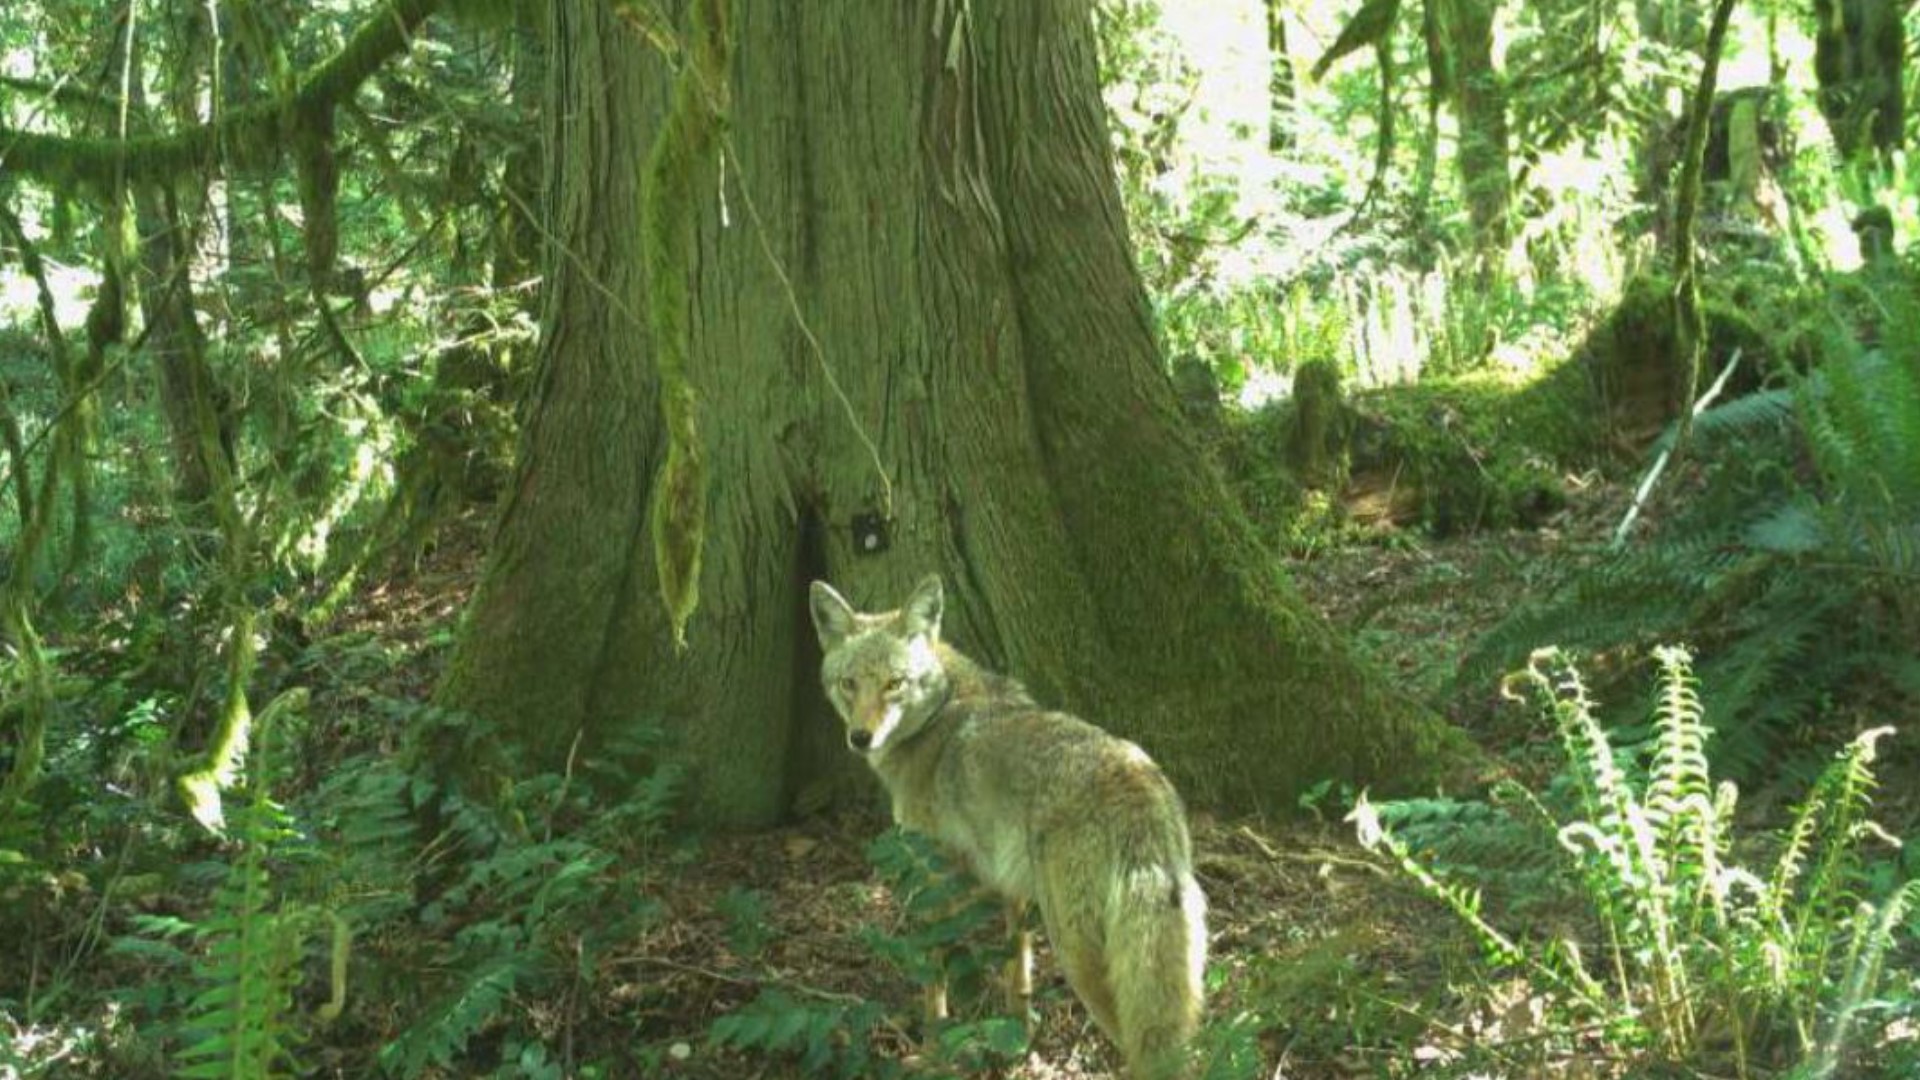 Explore Issaquah's wild side with a new app from Woodland Park Zoo.